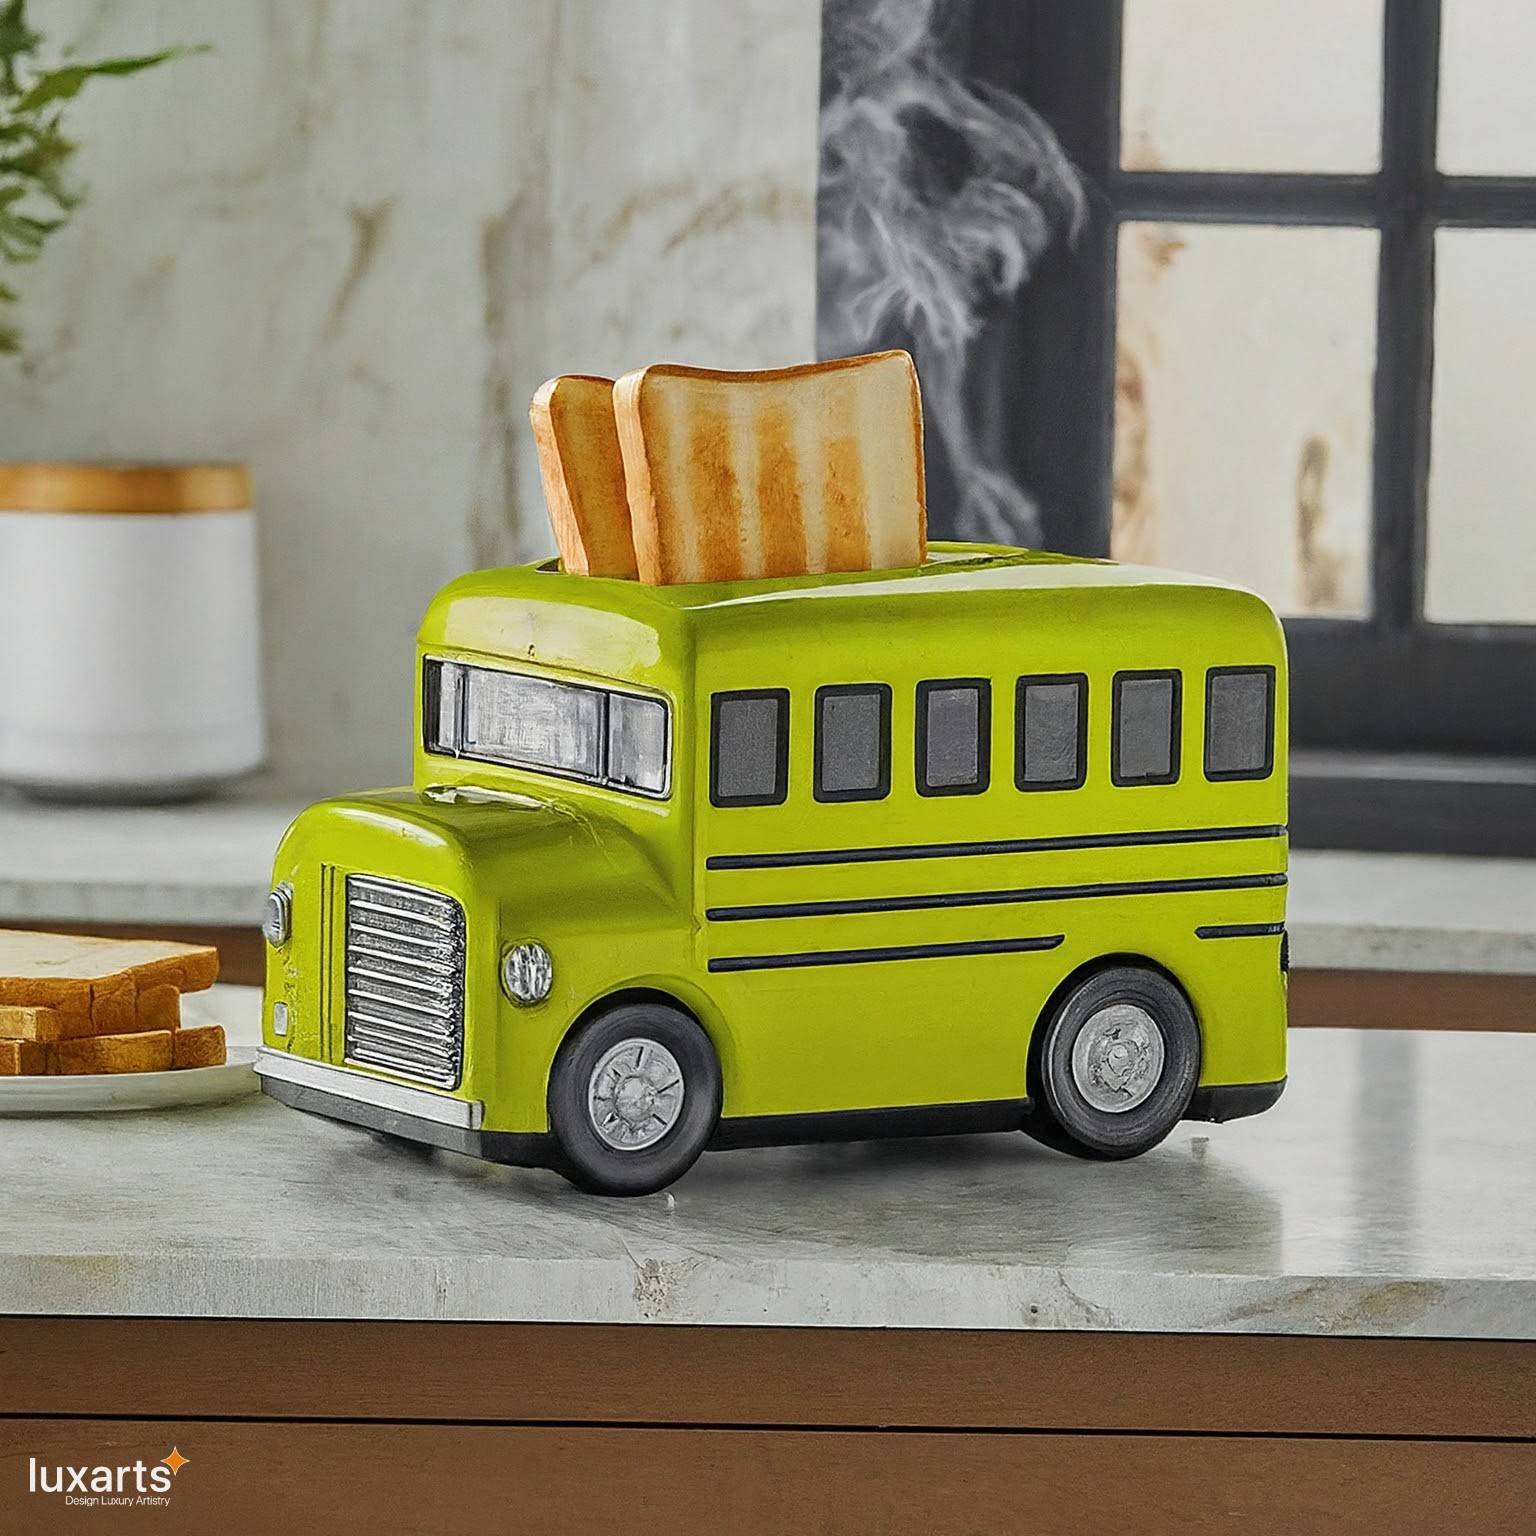 School Bus Shaped Toaster: Adding Fun to Breakfast Time luxarts school bus toaster 4